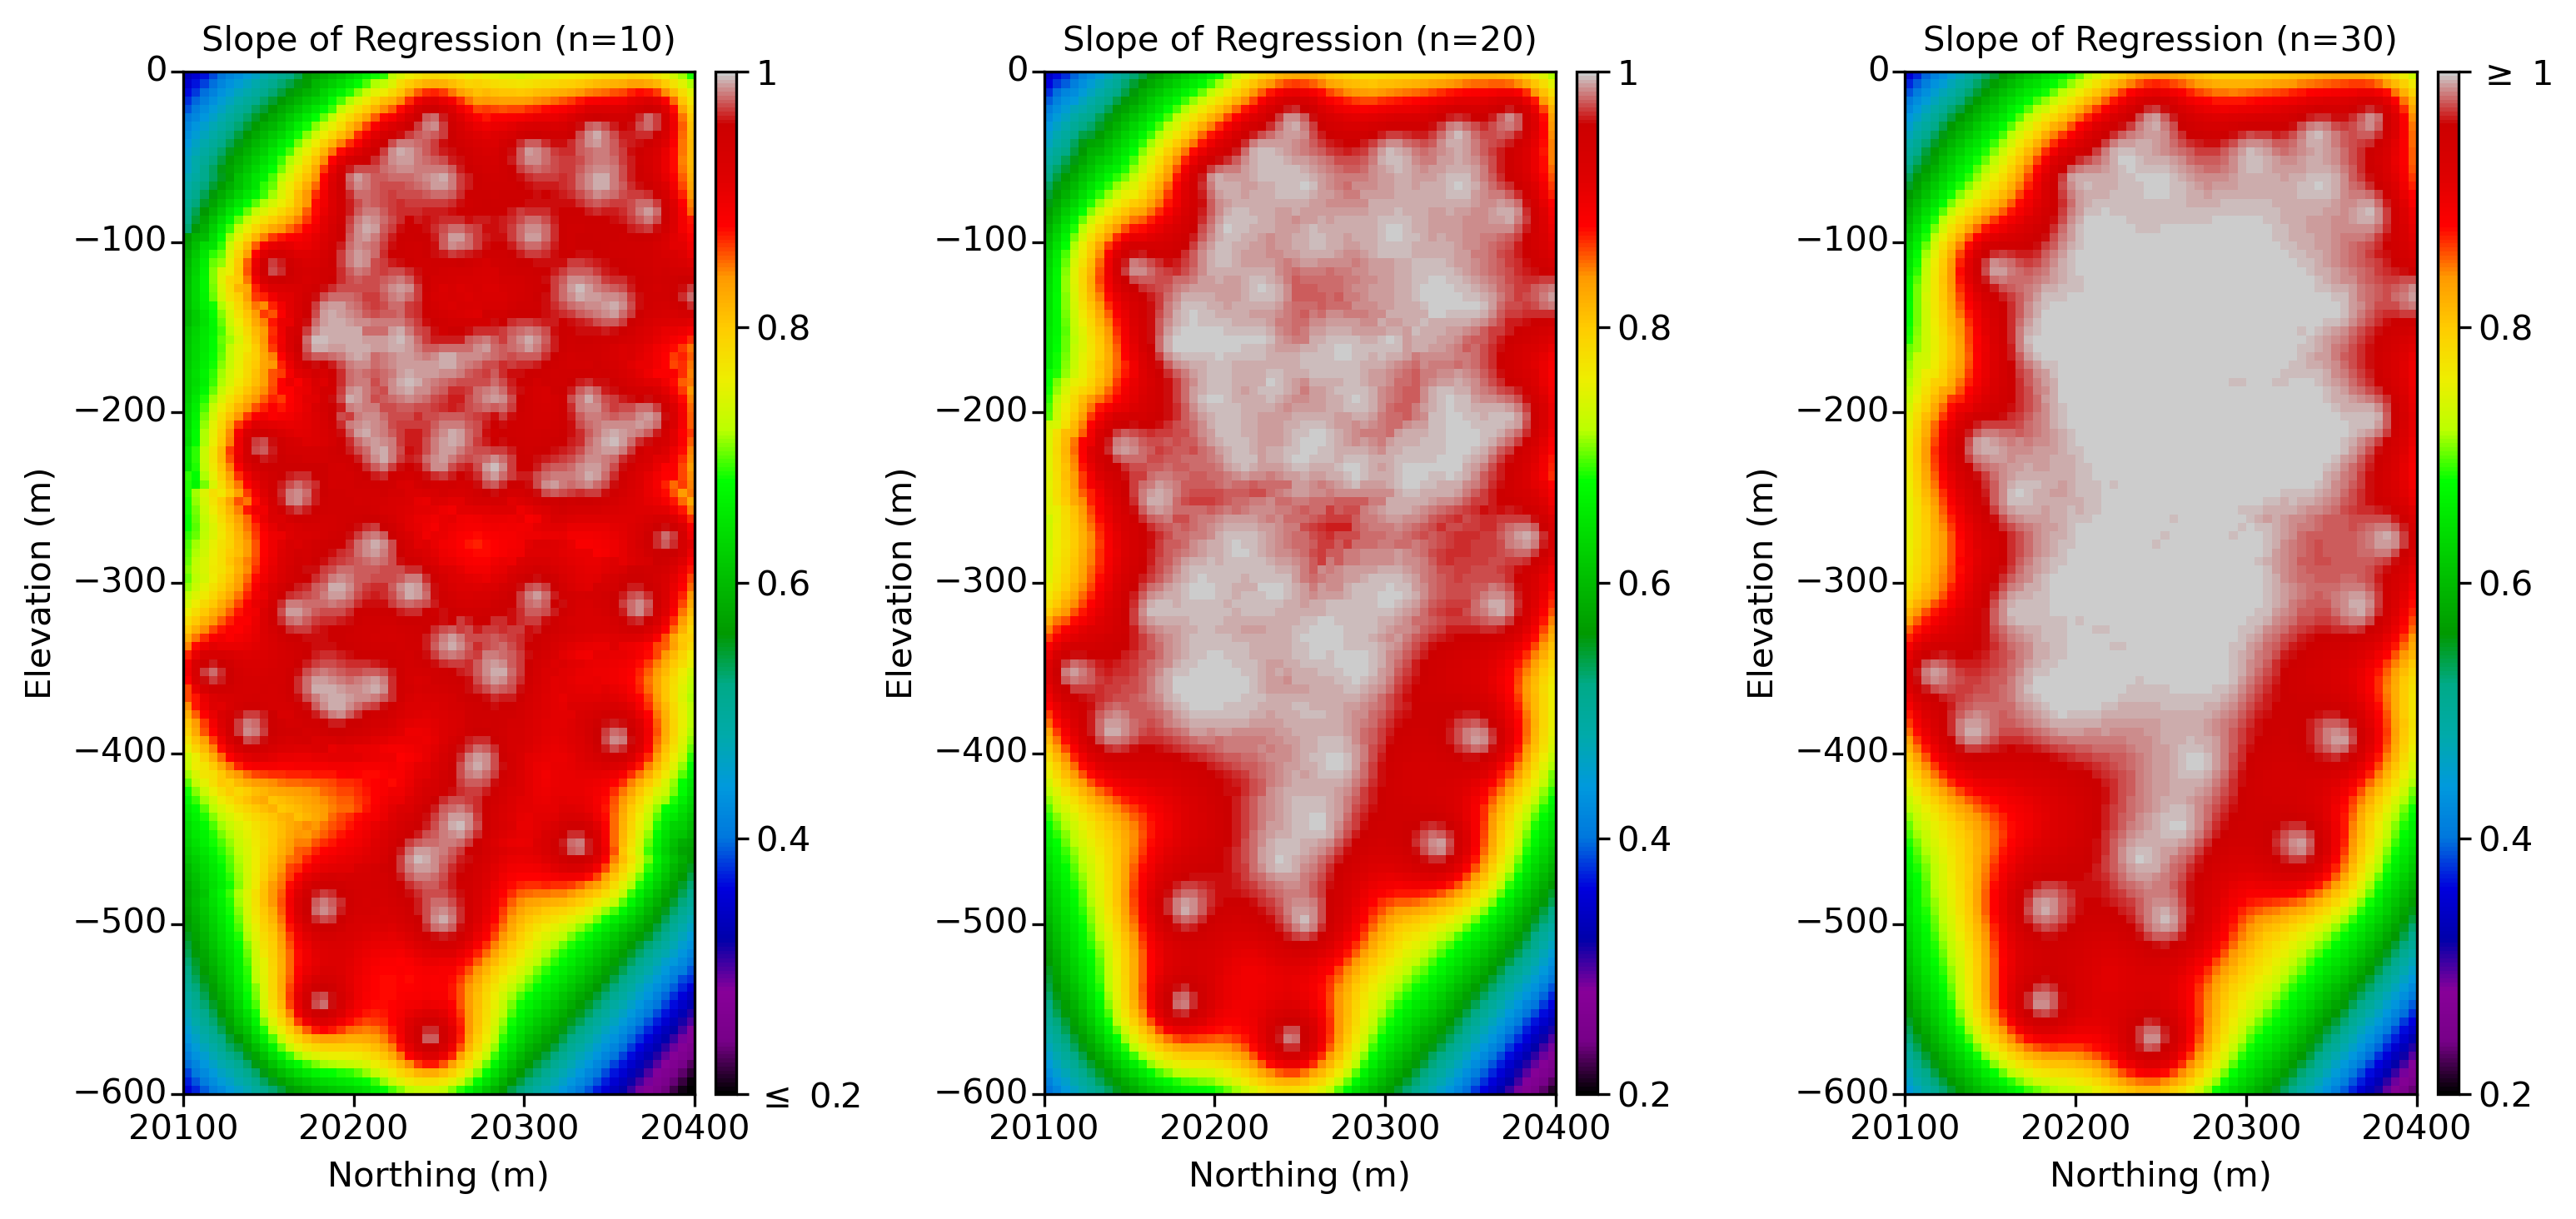 Figure 4: Slope of Regression map considering different number of data used for estimation (n=10,20,30).